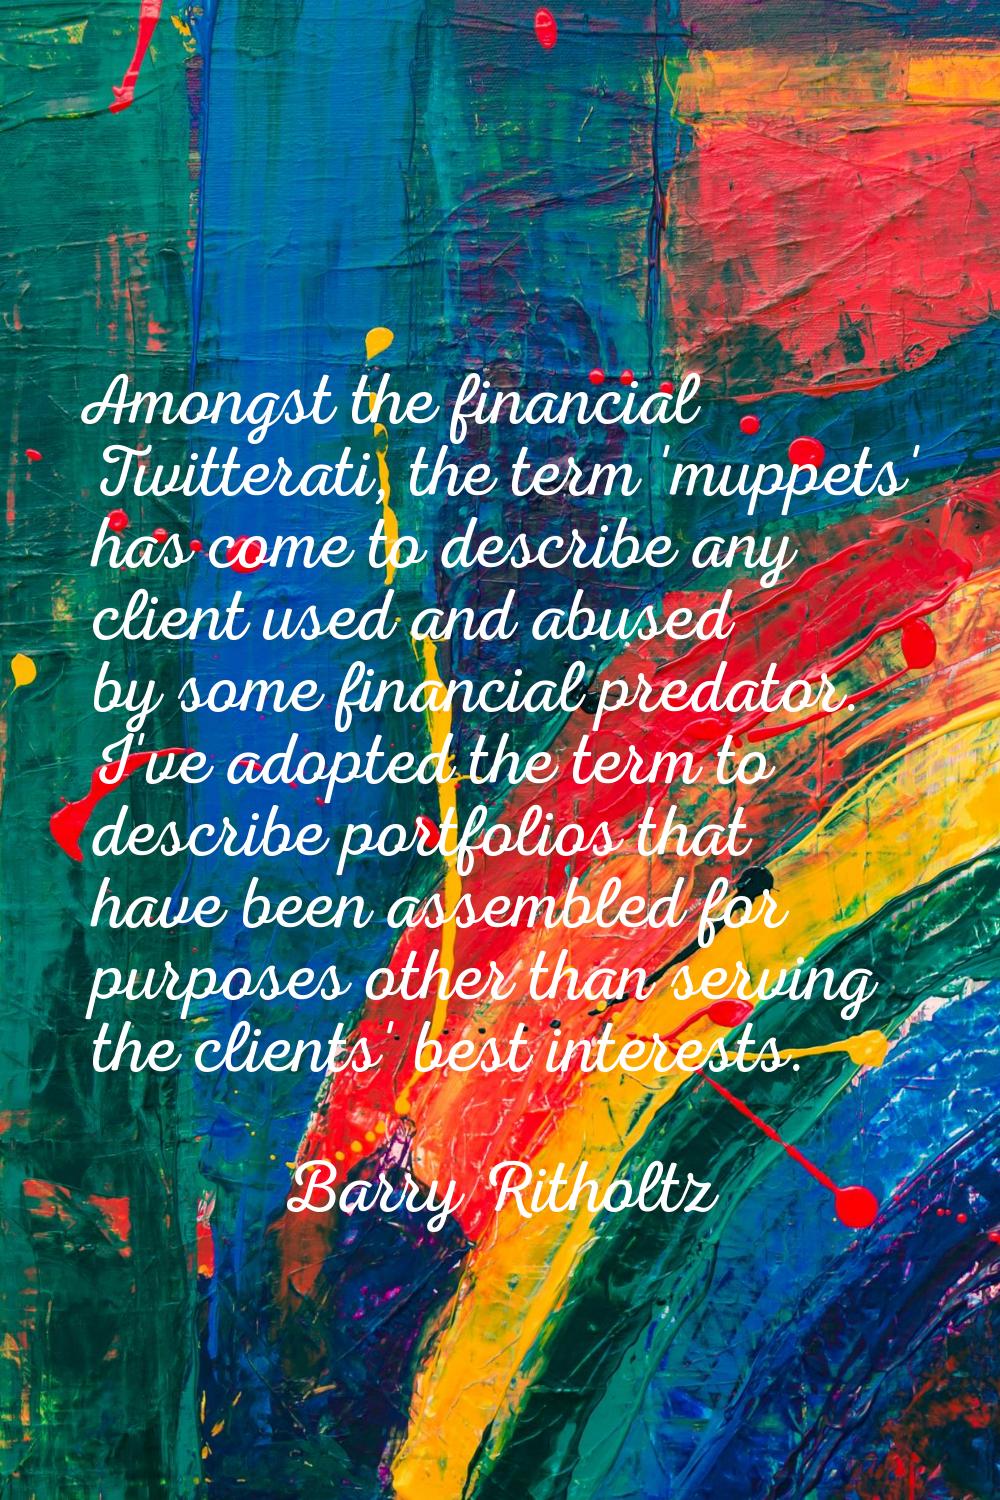 Amongst the financial Twitterati, the term 'muppets' has come to describe any client used and abuse